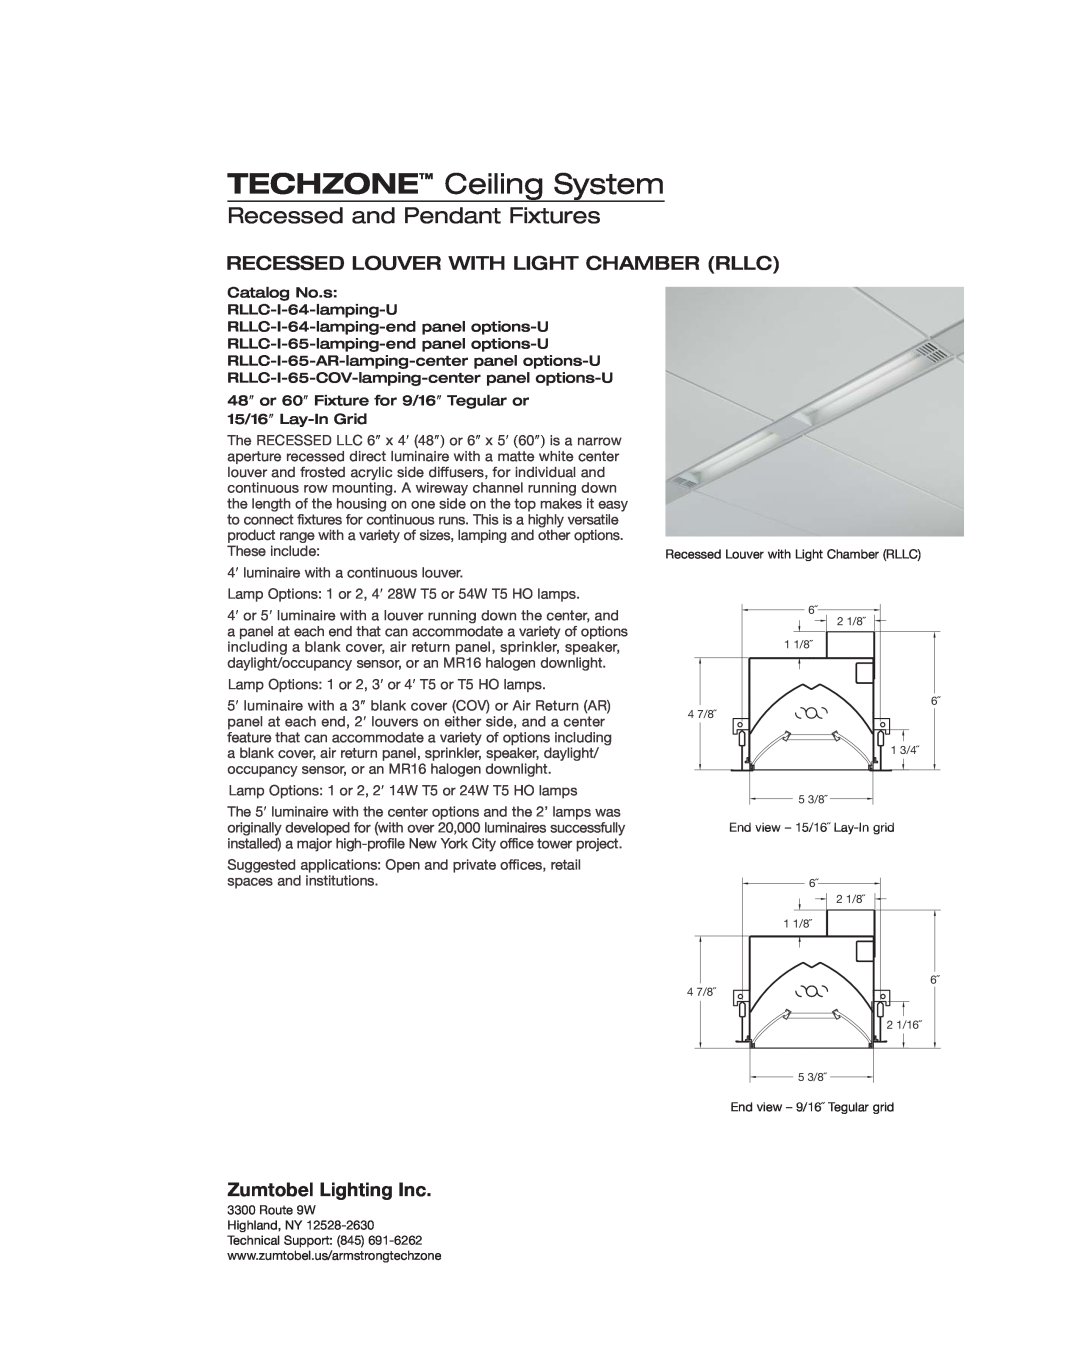 Armstrong World Industries Ceiling Lighting System manual Recessed Louver With Light Chamber Rllc, TECHZONE Ceiling System 